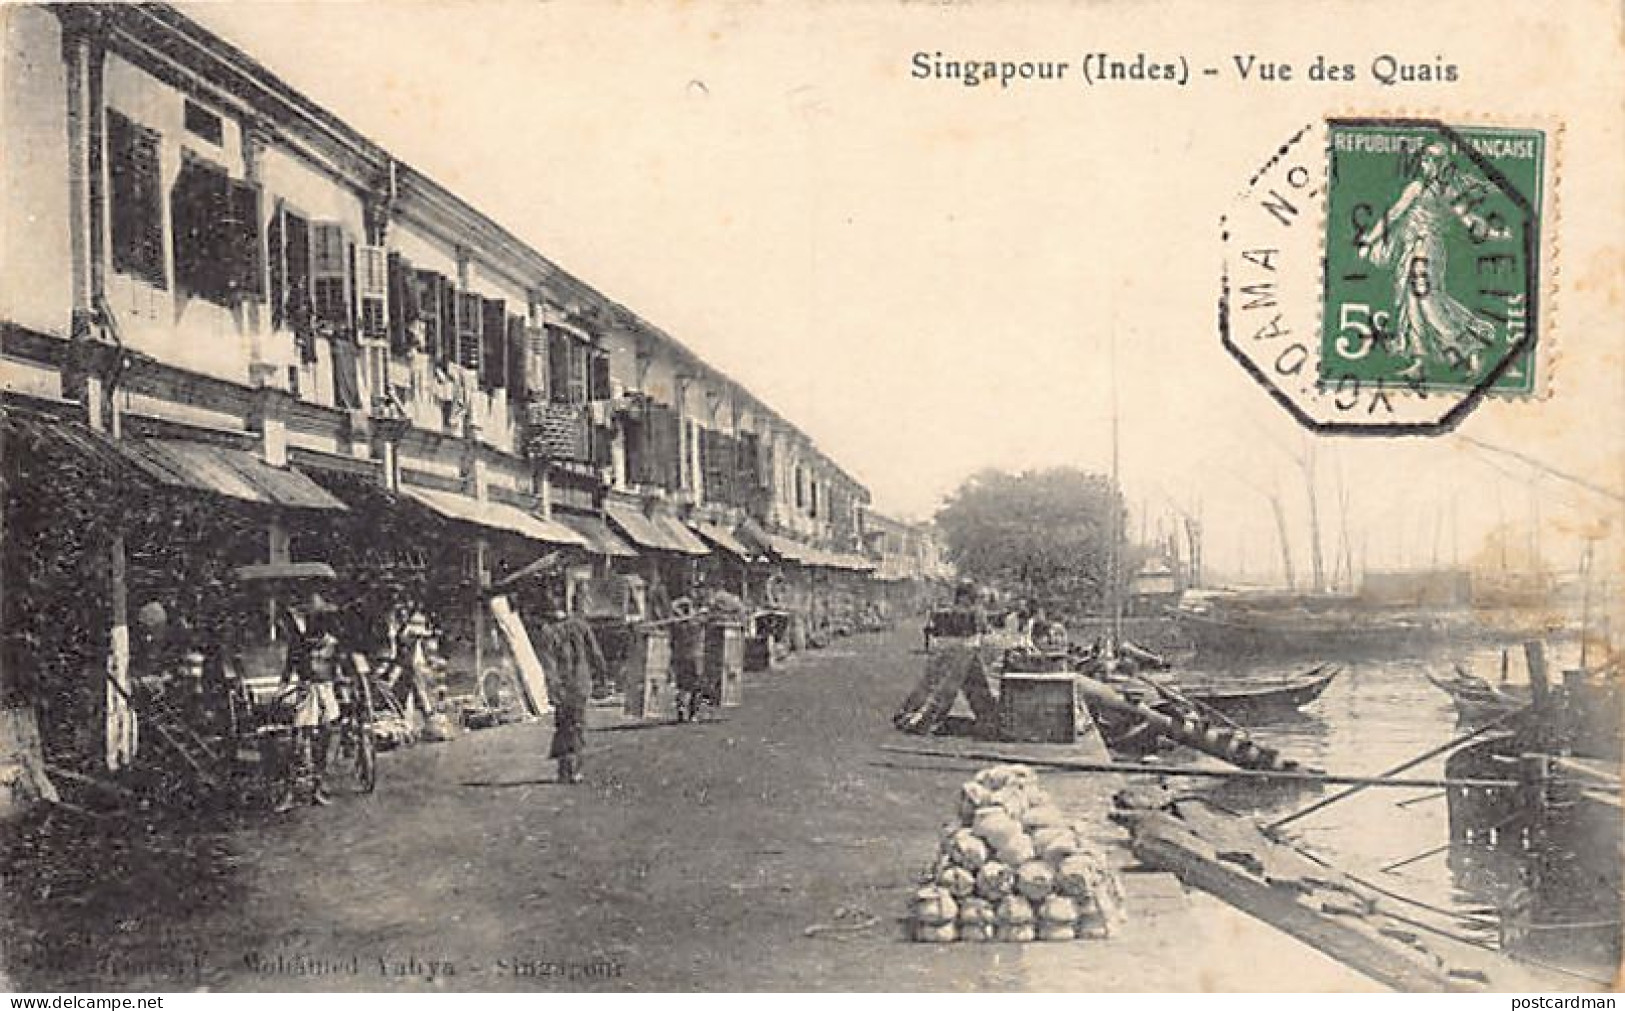 Singapore - View Of The Quays - Publ. H. Grimaud A M. Yahya  - Singapur